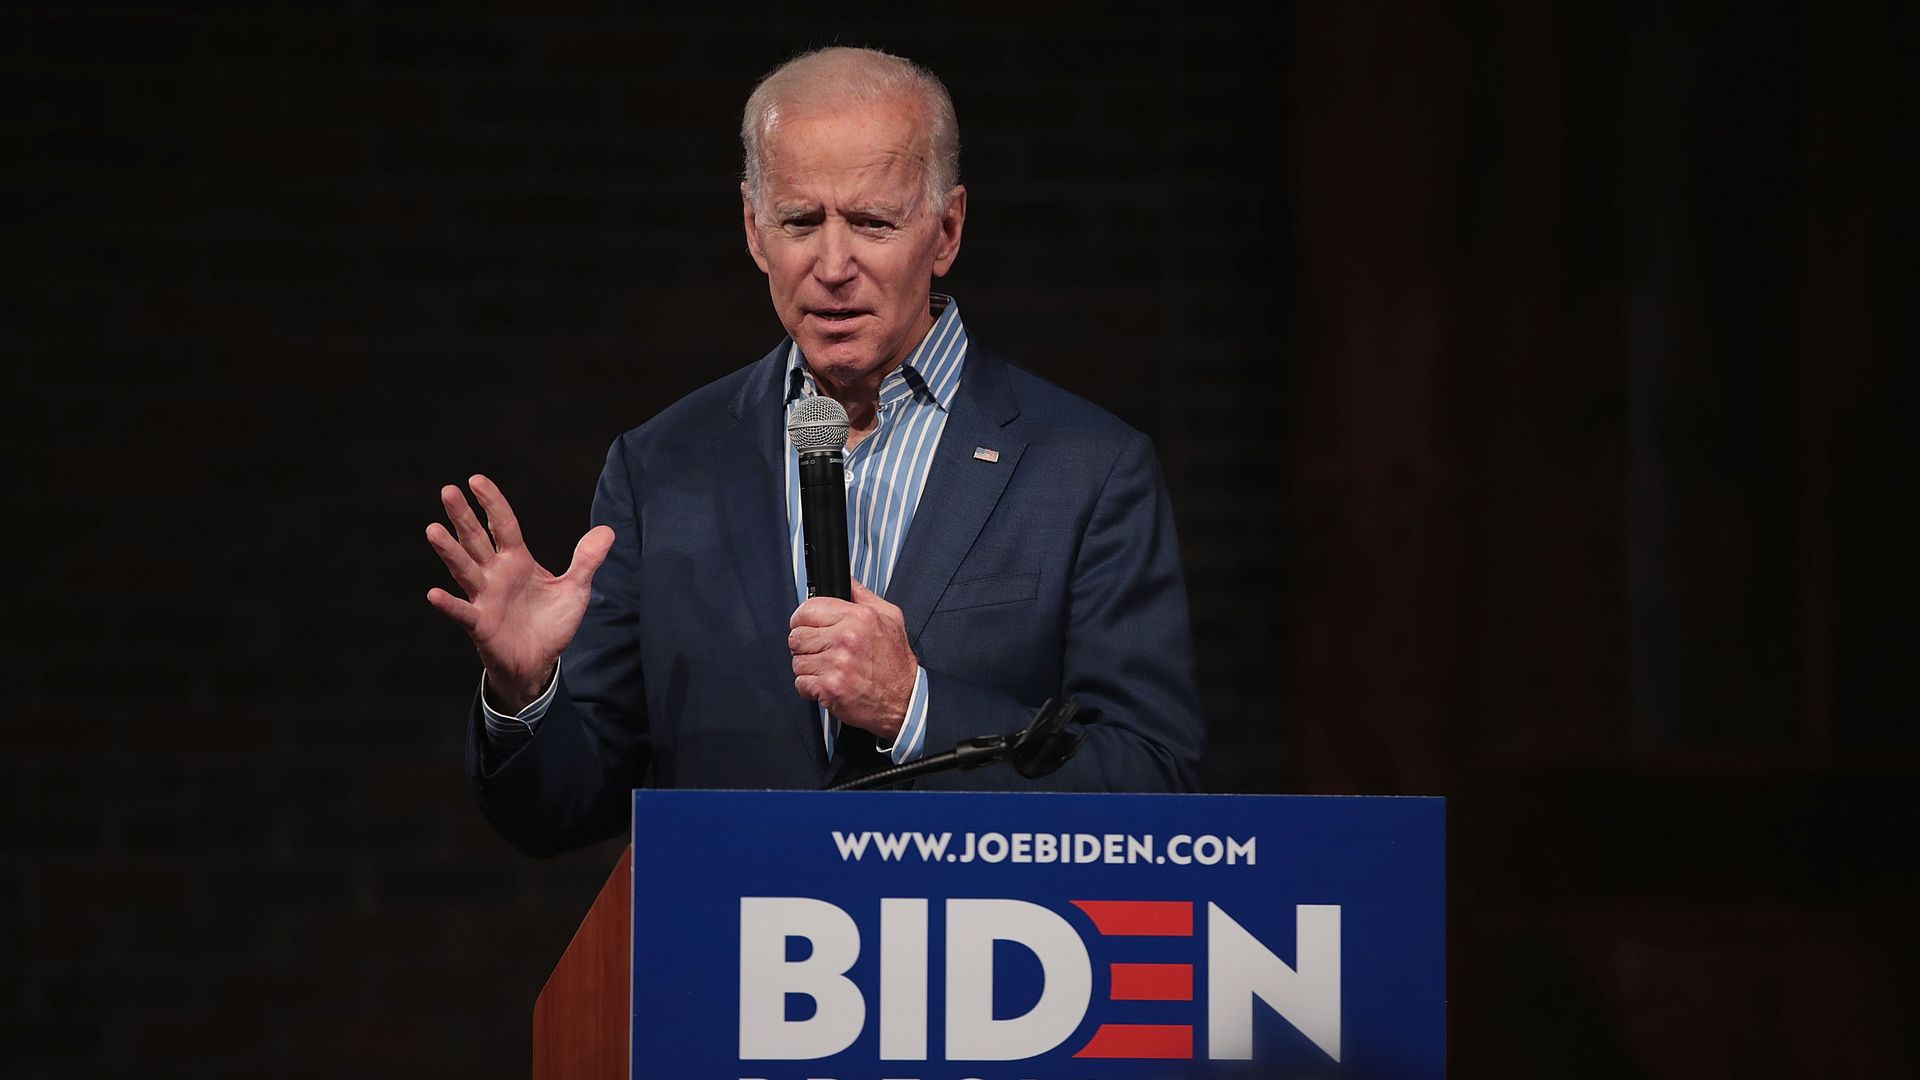 In this image, Biden stands behind a podium with his name on it and speaks into a microphone.